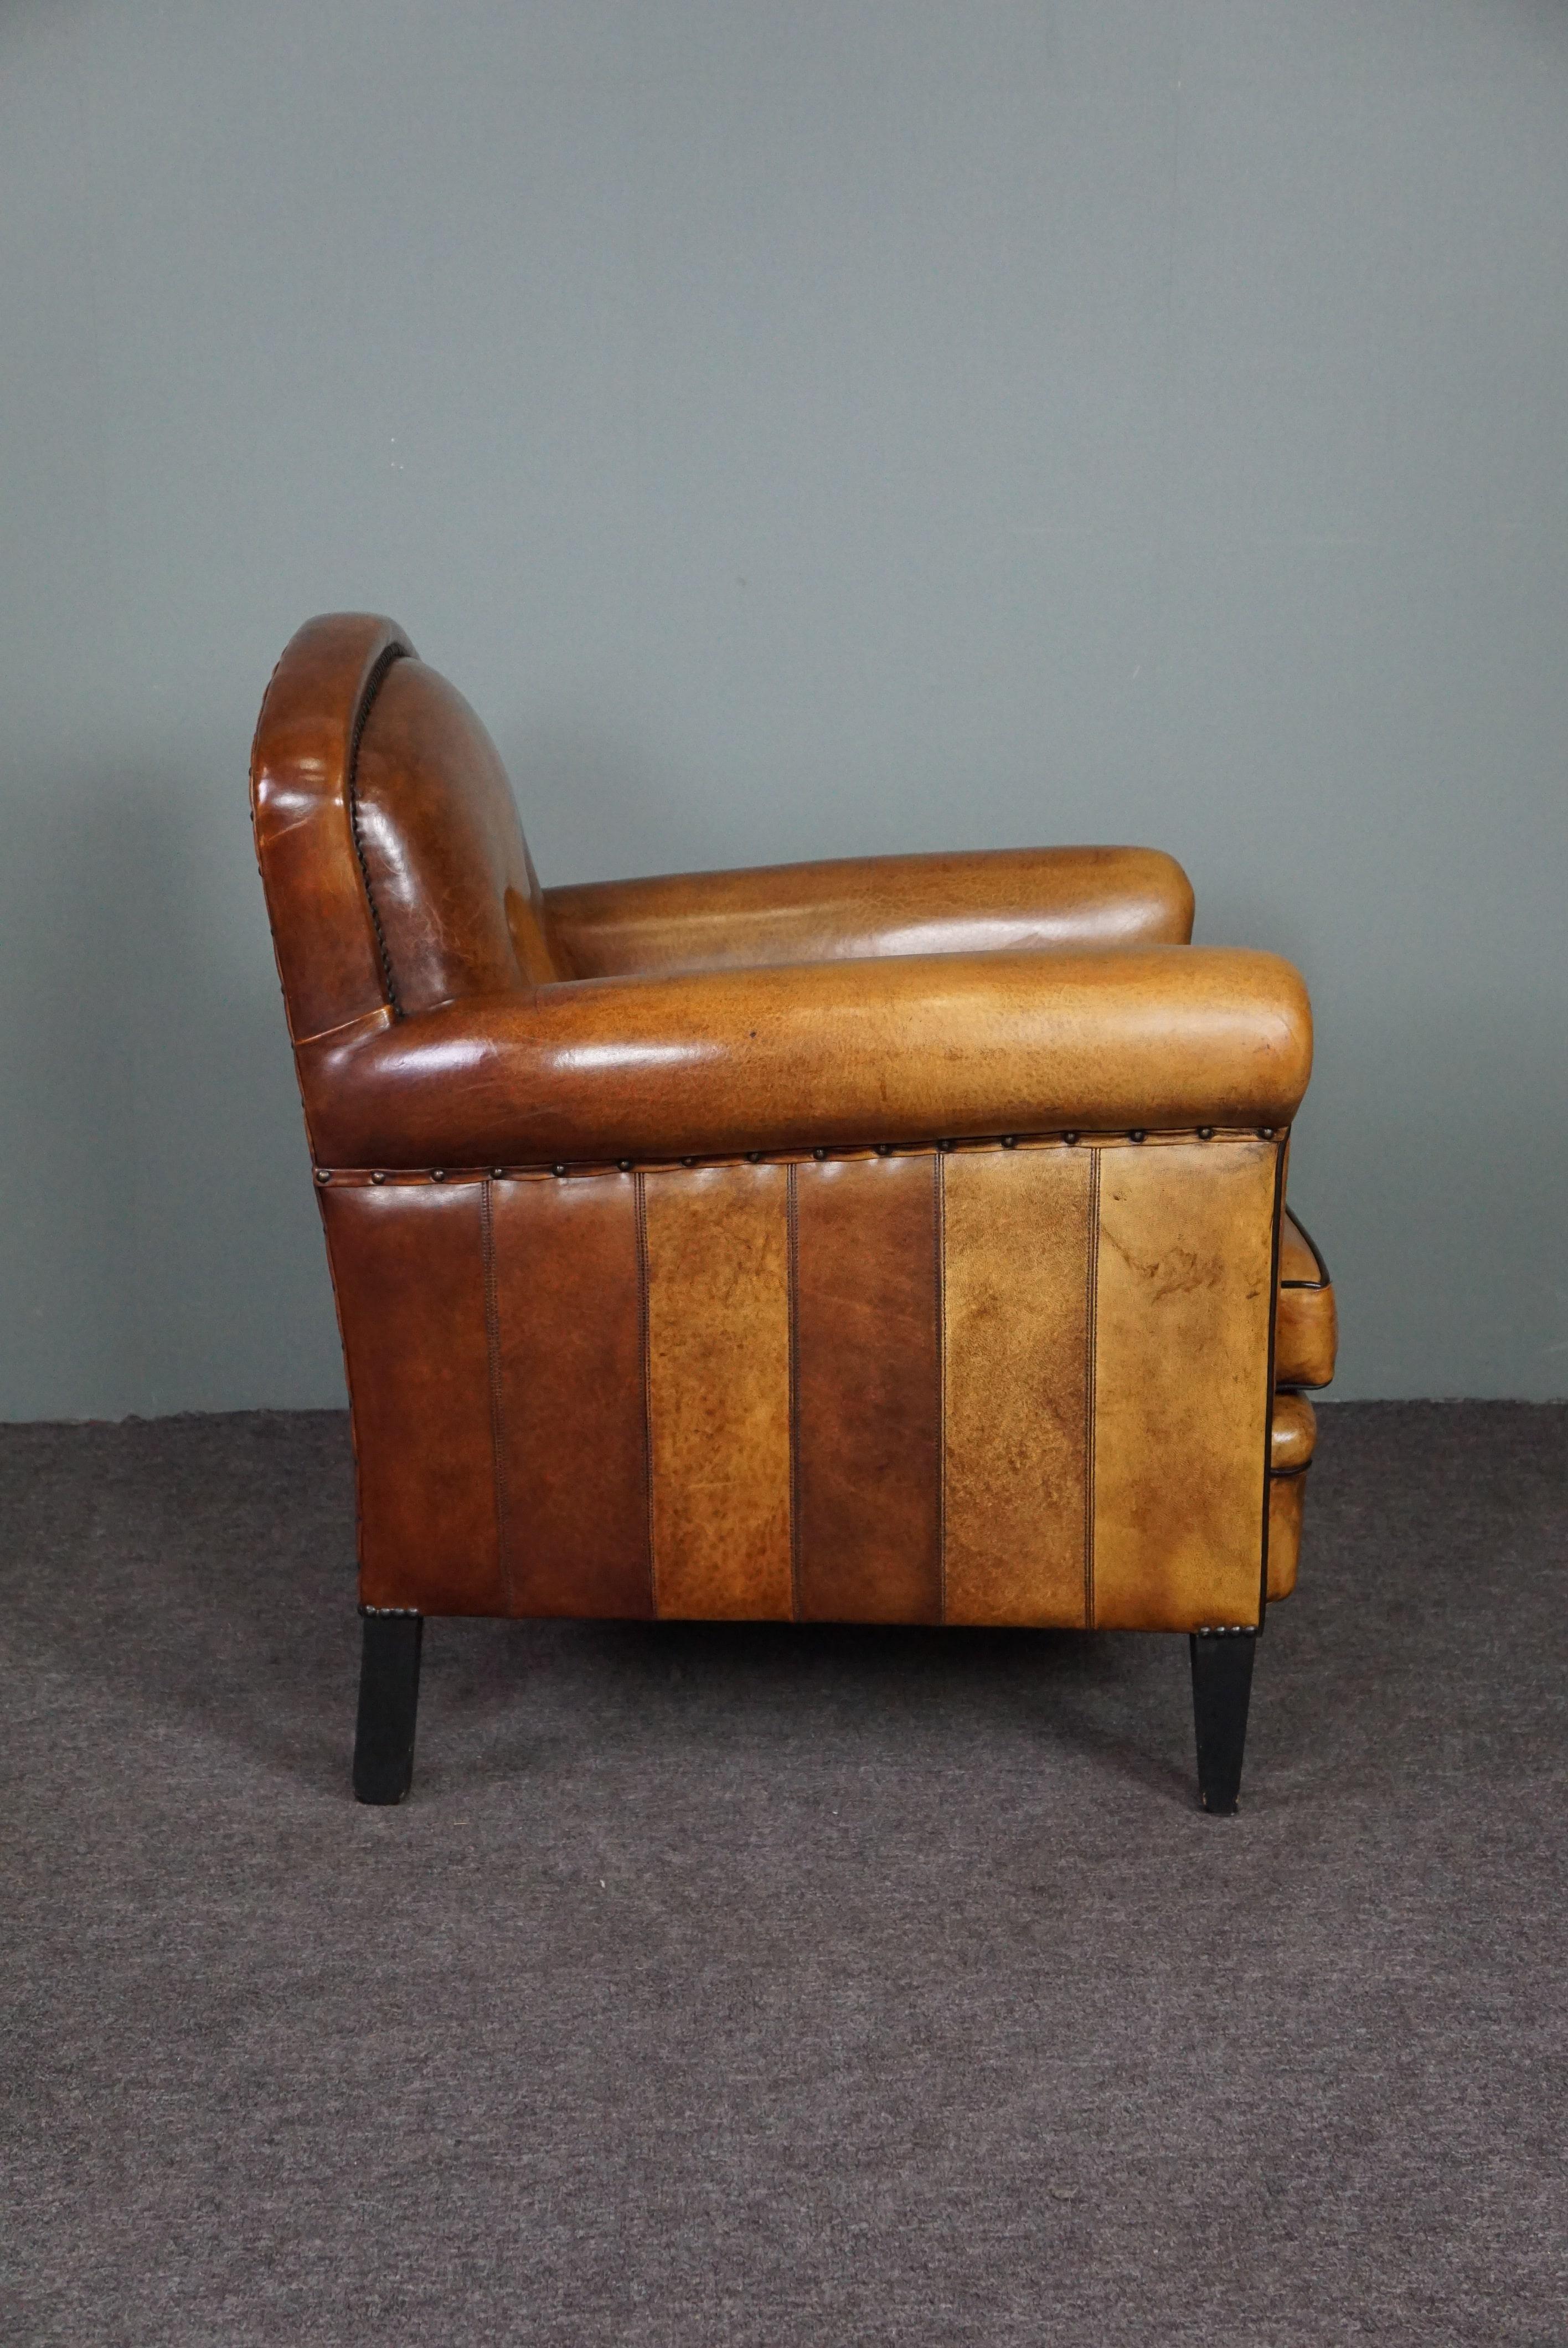 This well-colored sheepskin armchair/armchair has a striking drawing in the leather, is comfortable to sit on and is beautifully finished with decorative nails, black piping and stands on slender, sleek black wooden legs. Characteristic of this